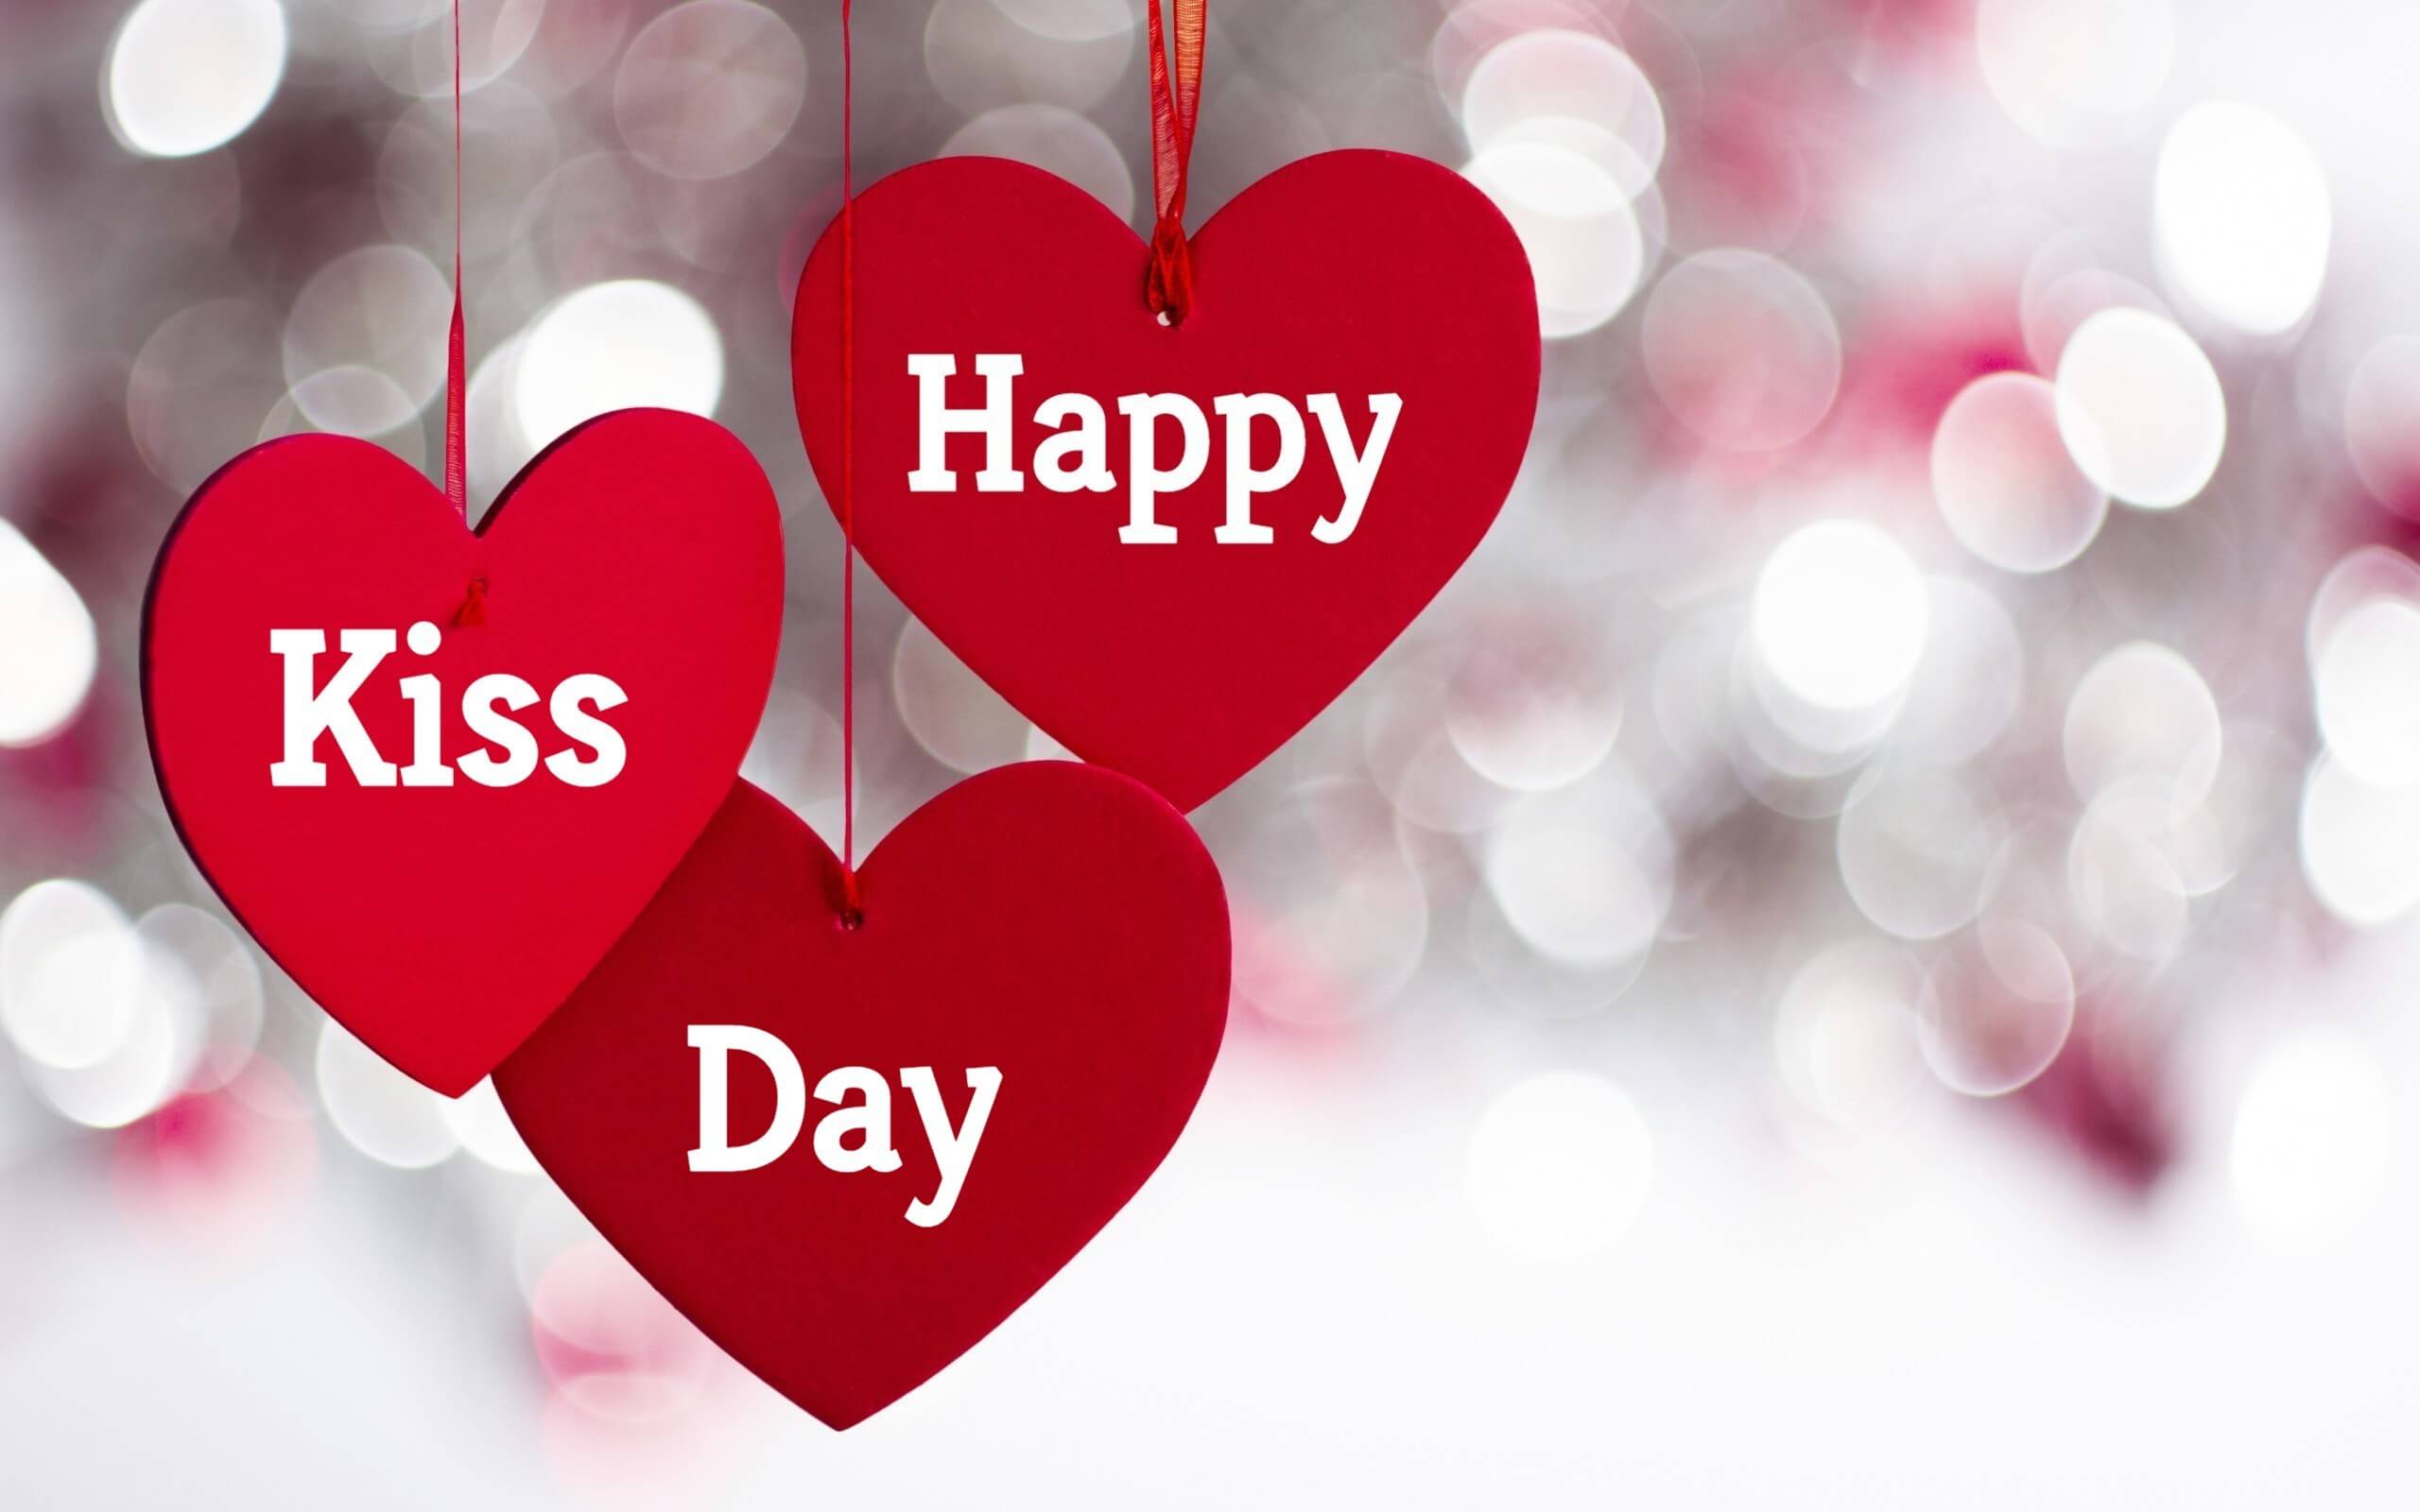 Happy Kiss Day Wishes Hanging Hearts Love Valentine February 12th